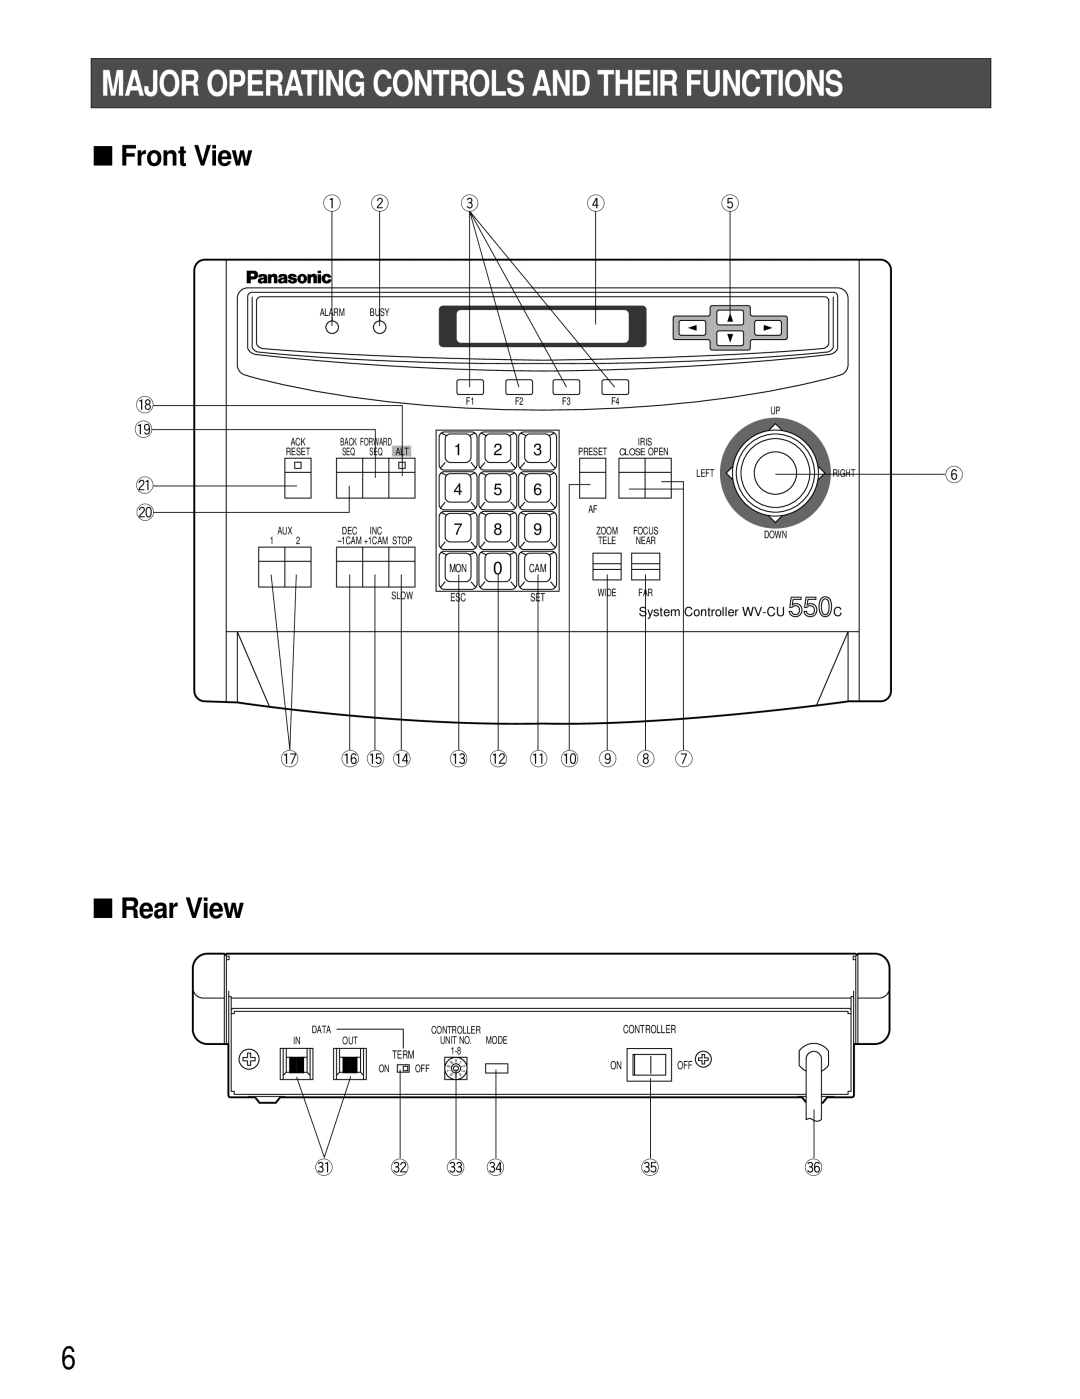 Panasonic WV-CU550C operating instructions Front View, Rear View, Major Operating Controls And Their Functions 